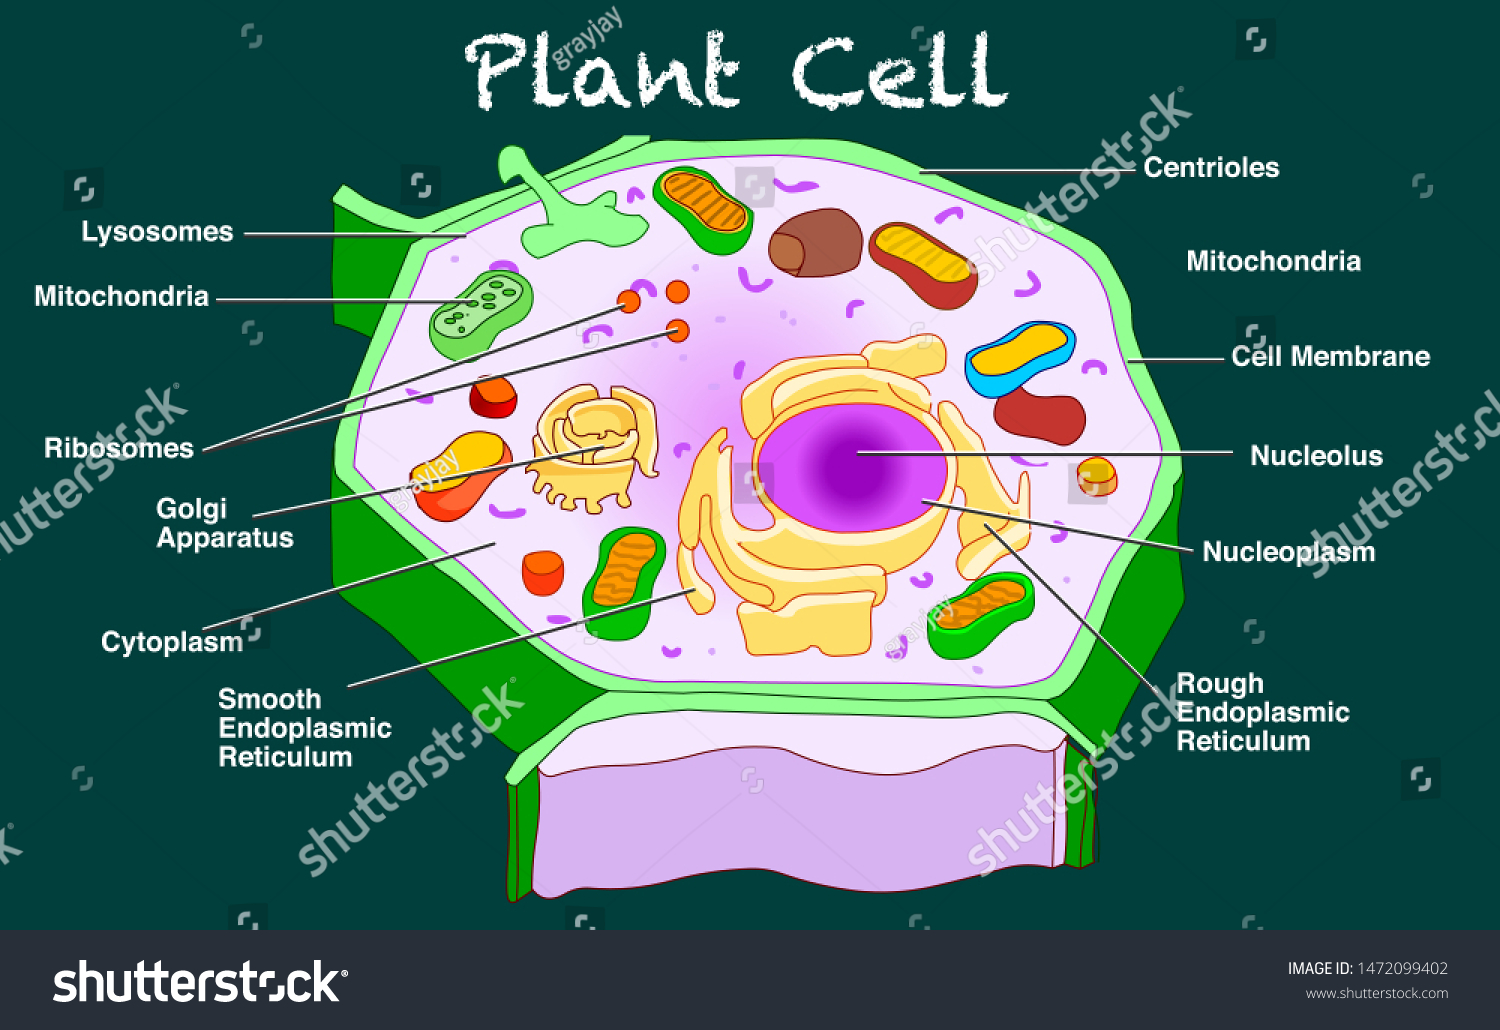 Plant Cell structure Campbell Biology рисунок